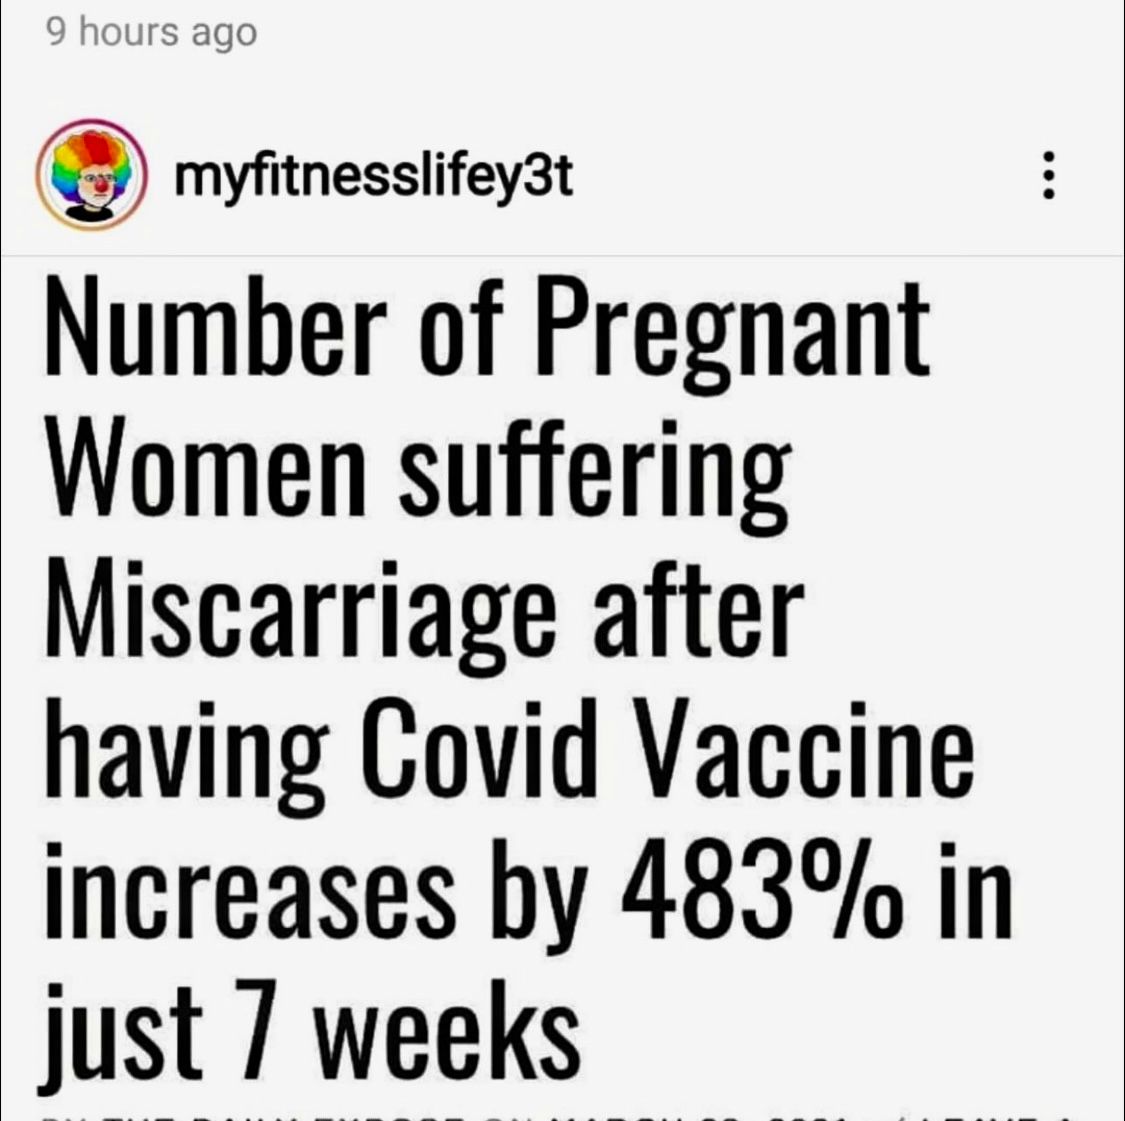 Debunking Covid Vaccine Myths - Do they cause miscarriages? Are they altering periods?